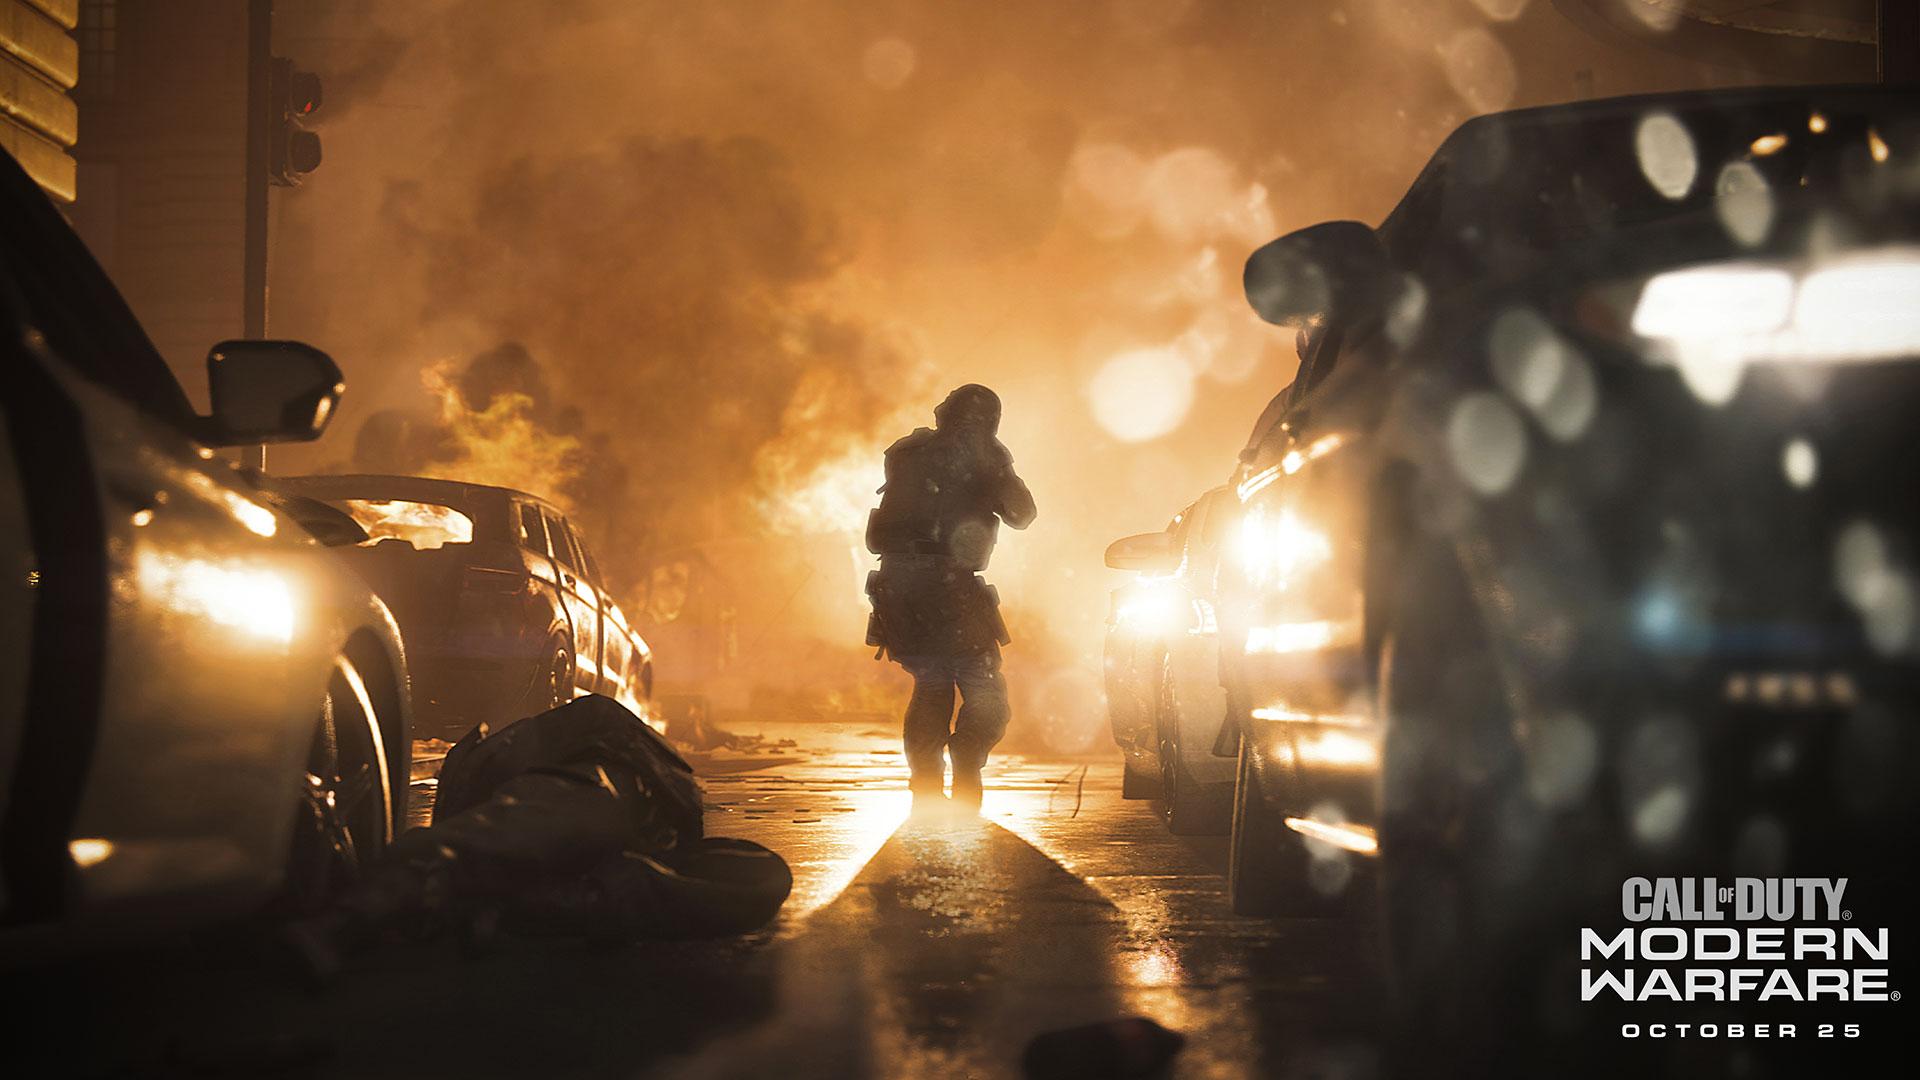 Game Review: Does 'Call of Duty: Modern Warfare' Live Up to